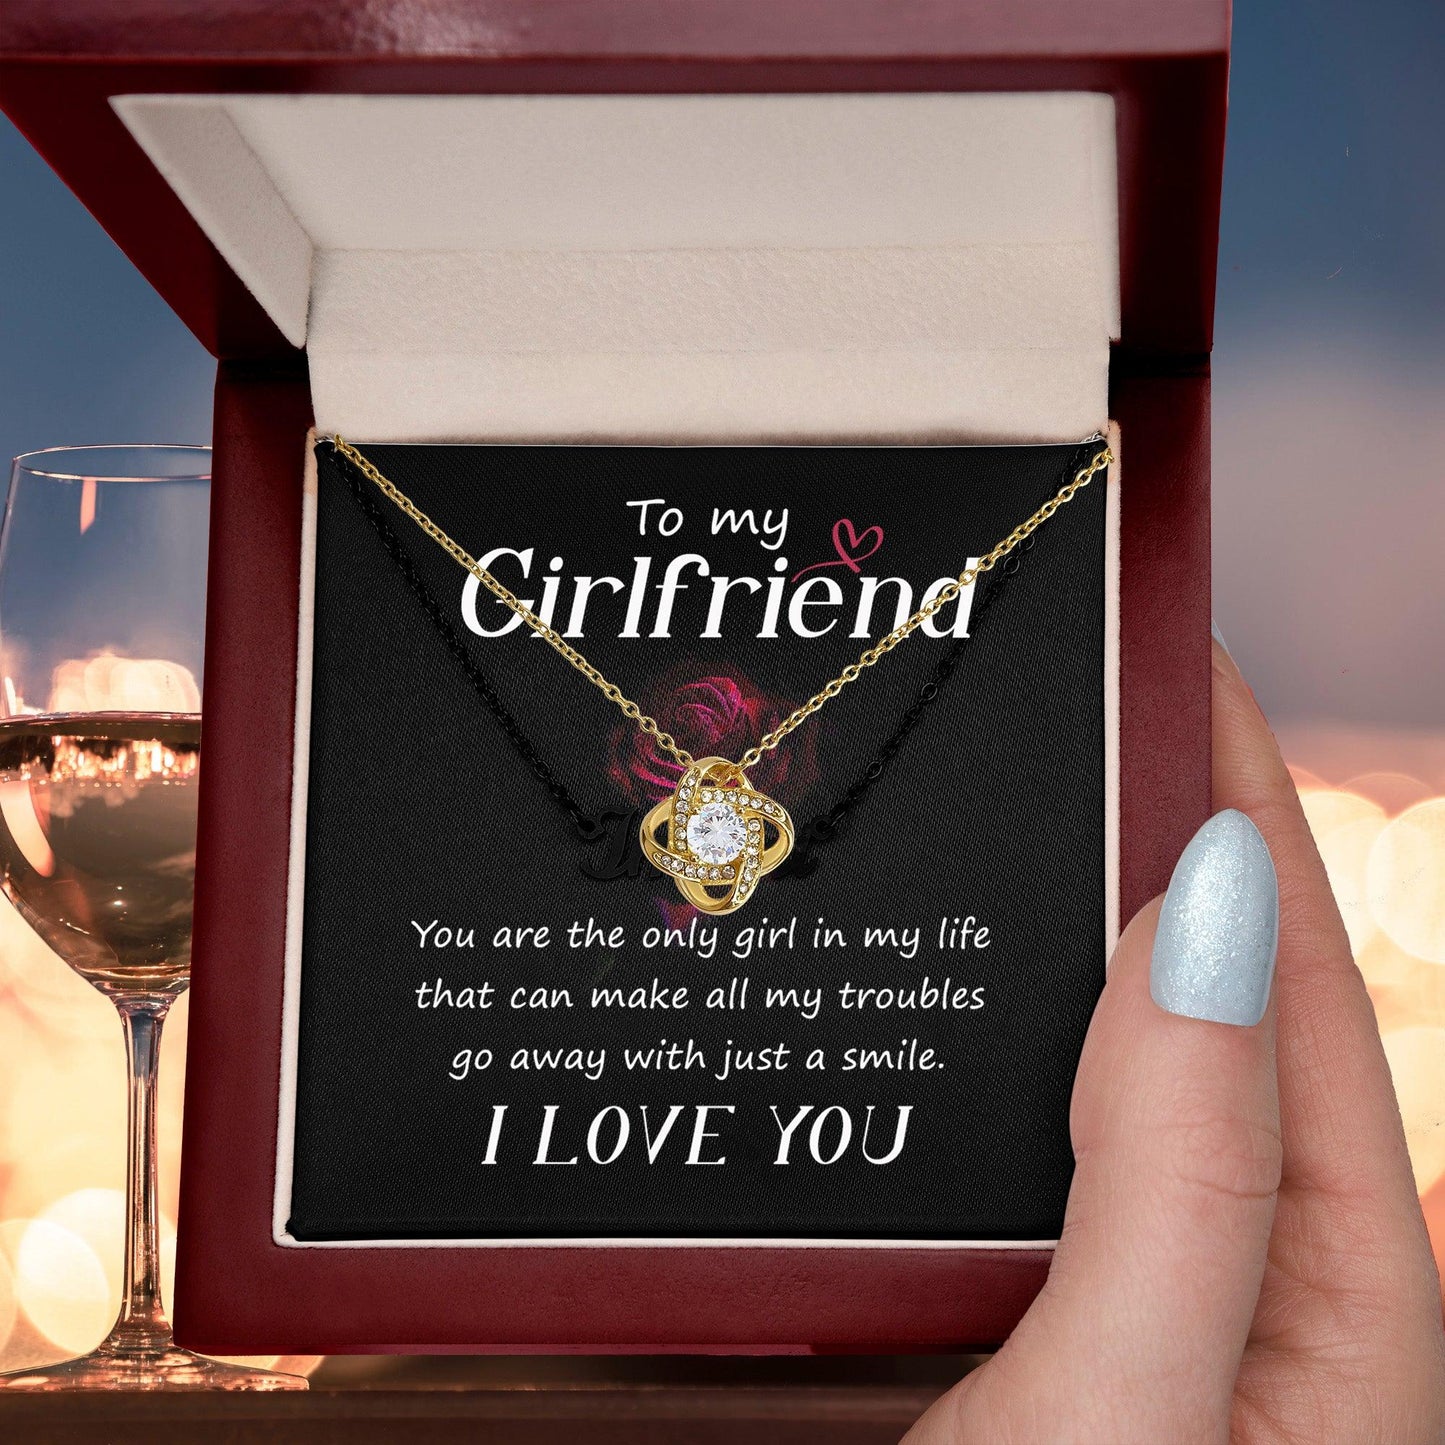 To my Girlfriend You Are the Only Girl Valentine Love Knot Necklace - Mallard Moon Gift Shop